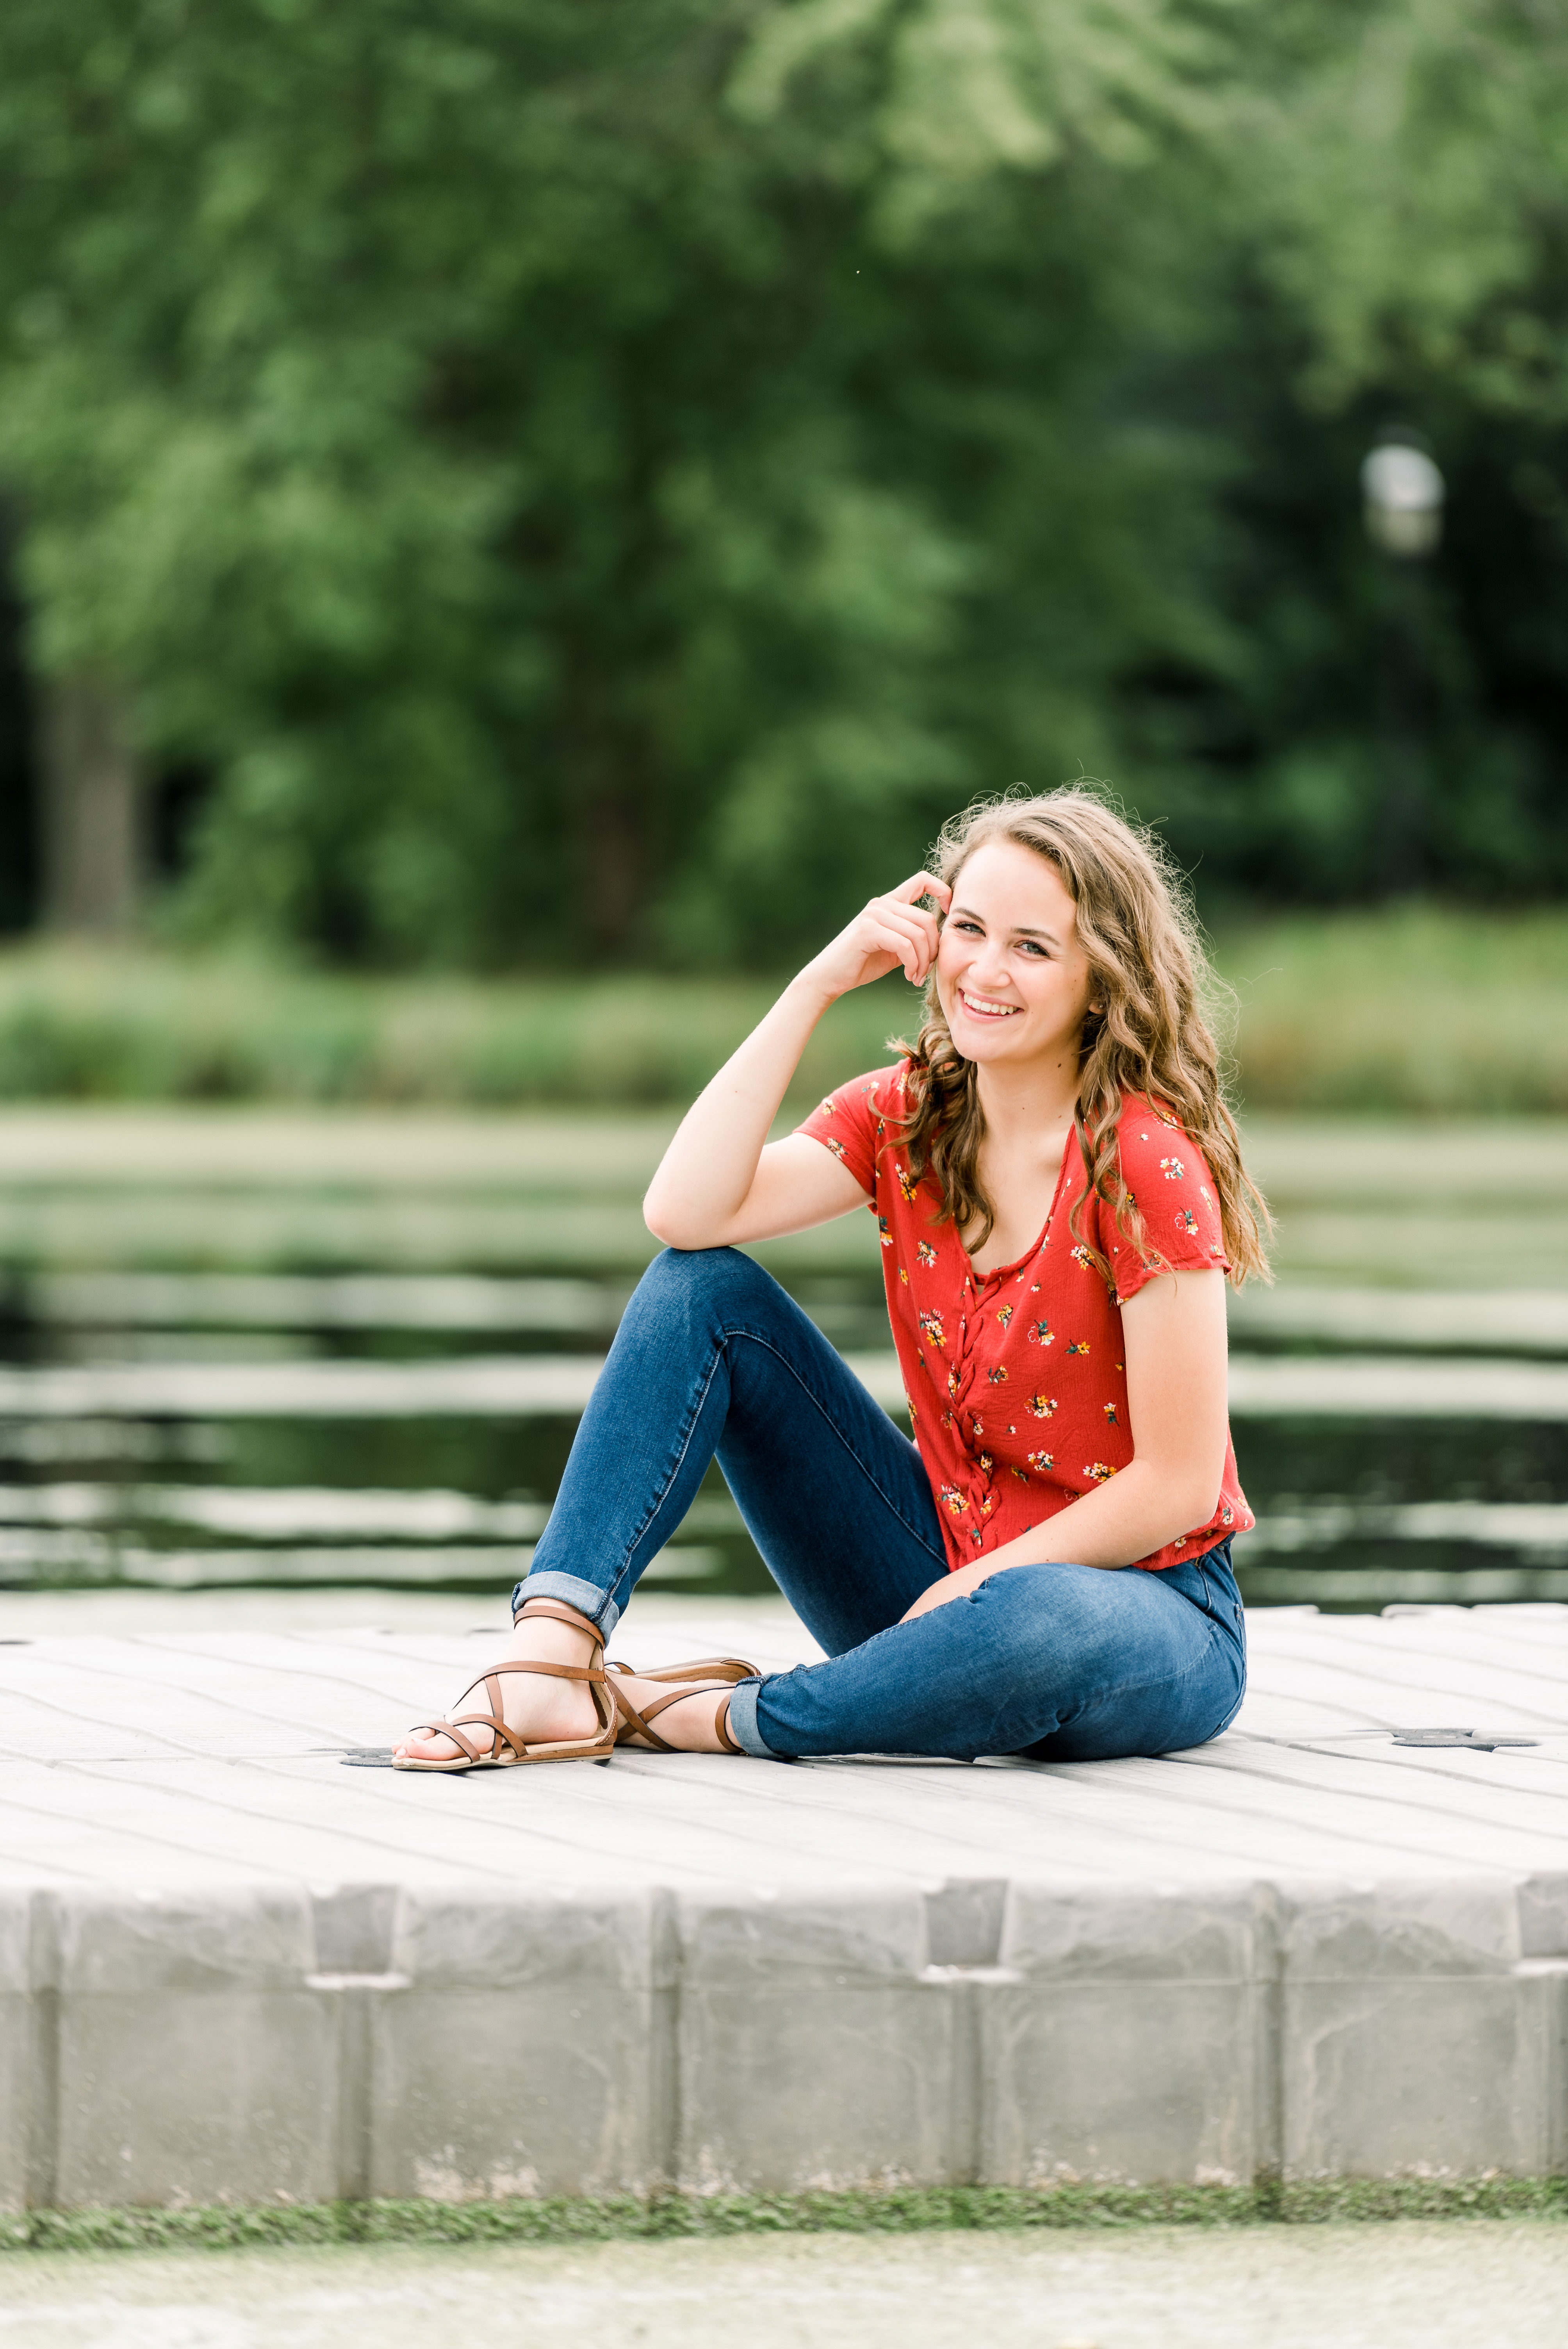 Girl in red floral top and blue jeans sitting on a boat ramp